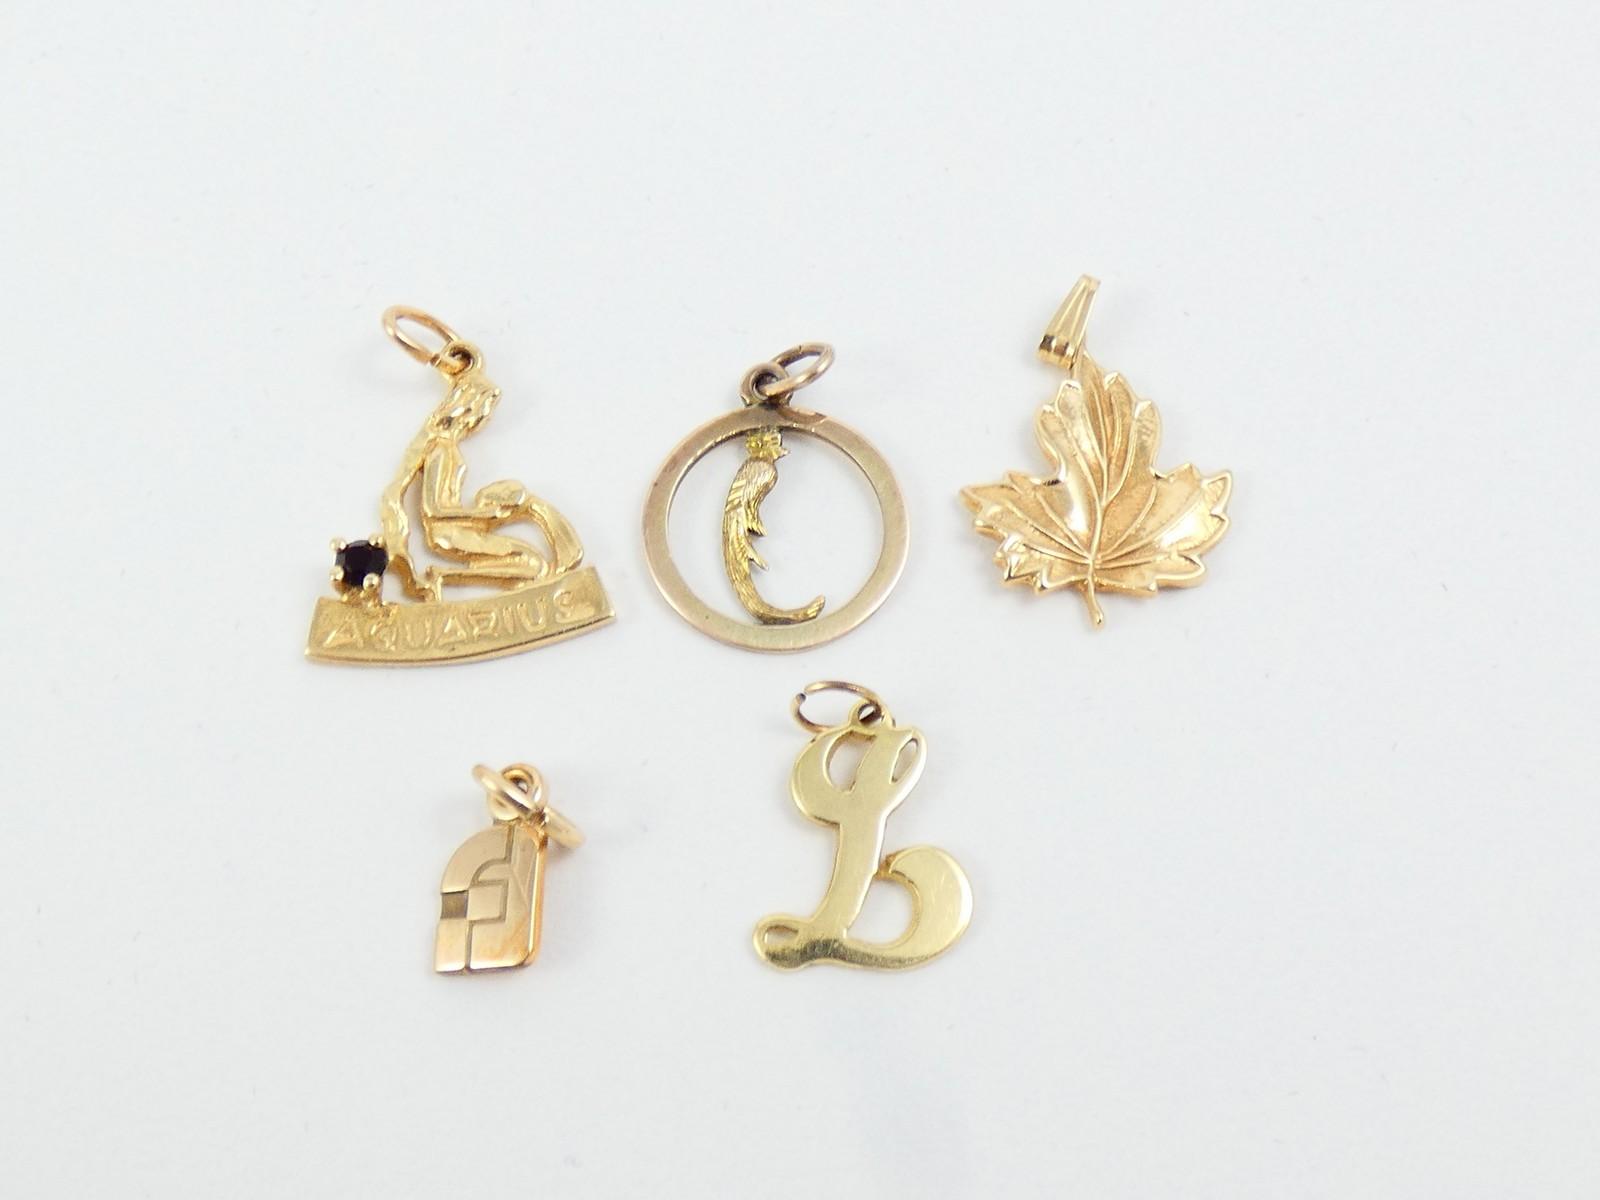 5 GOLD CHARMS